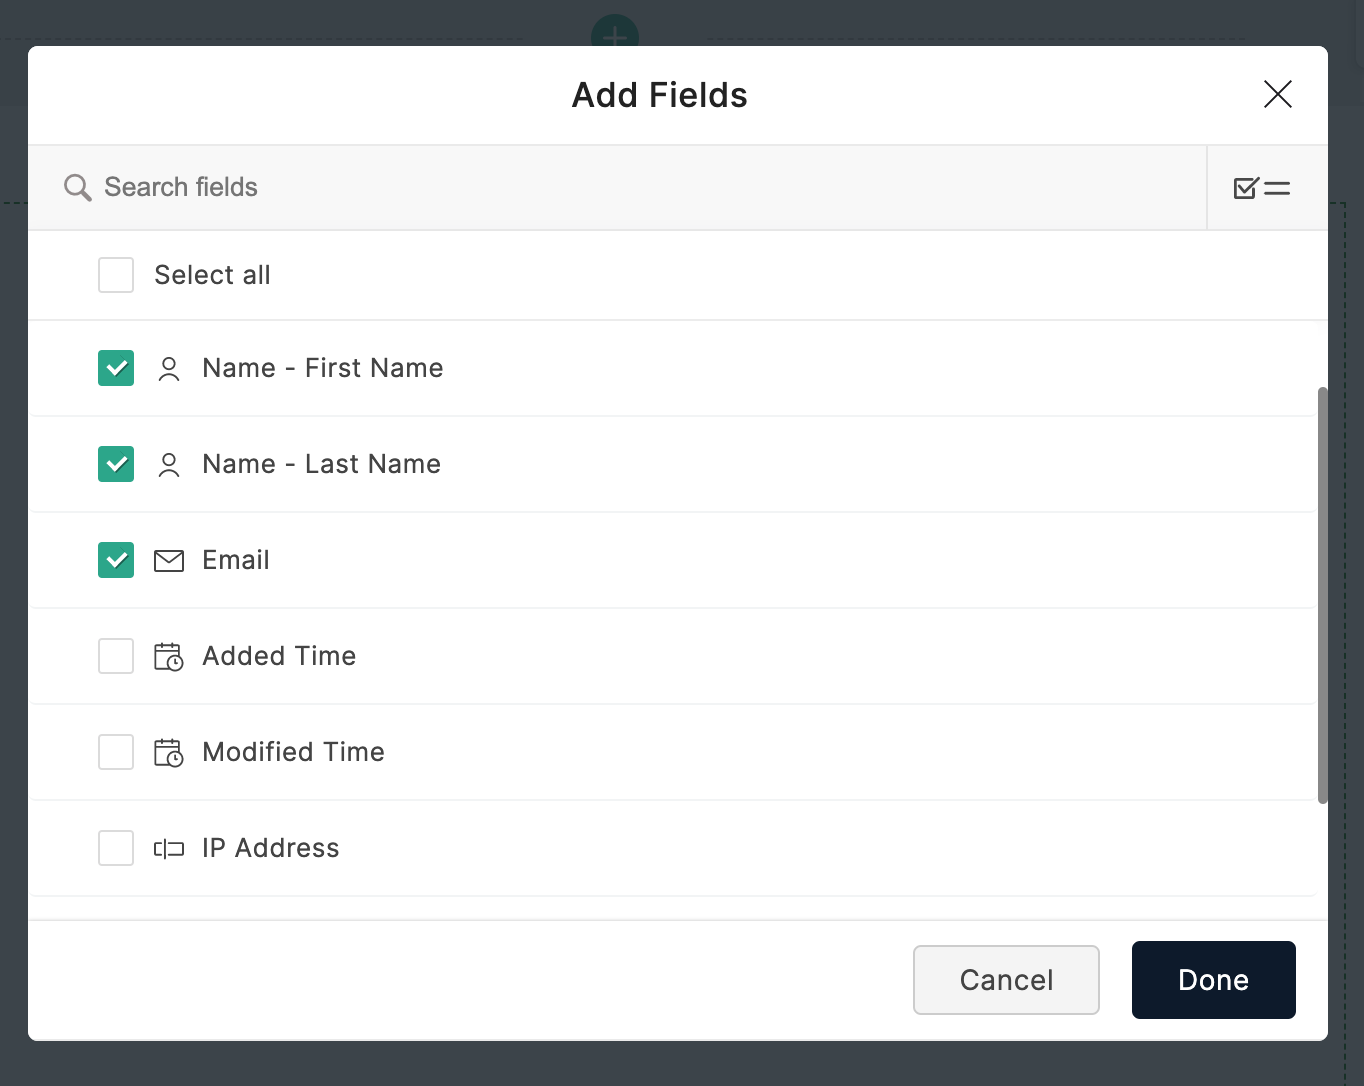 Add Fields to Summary Table